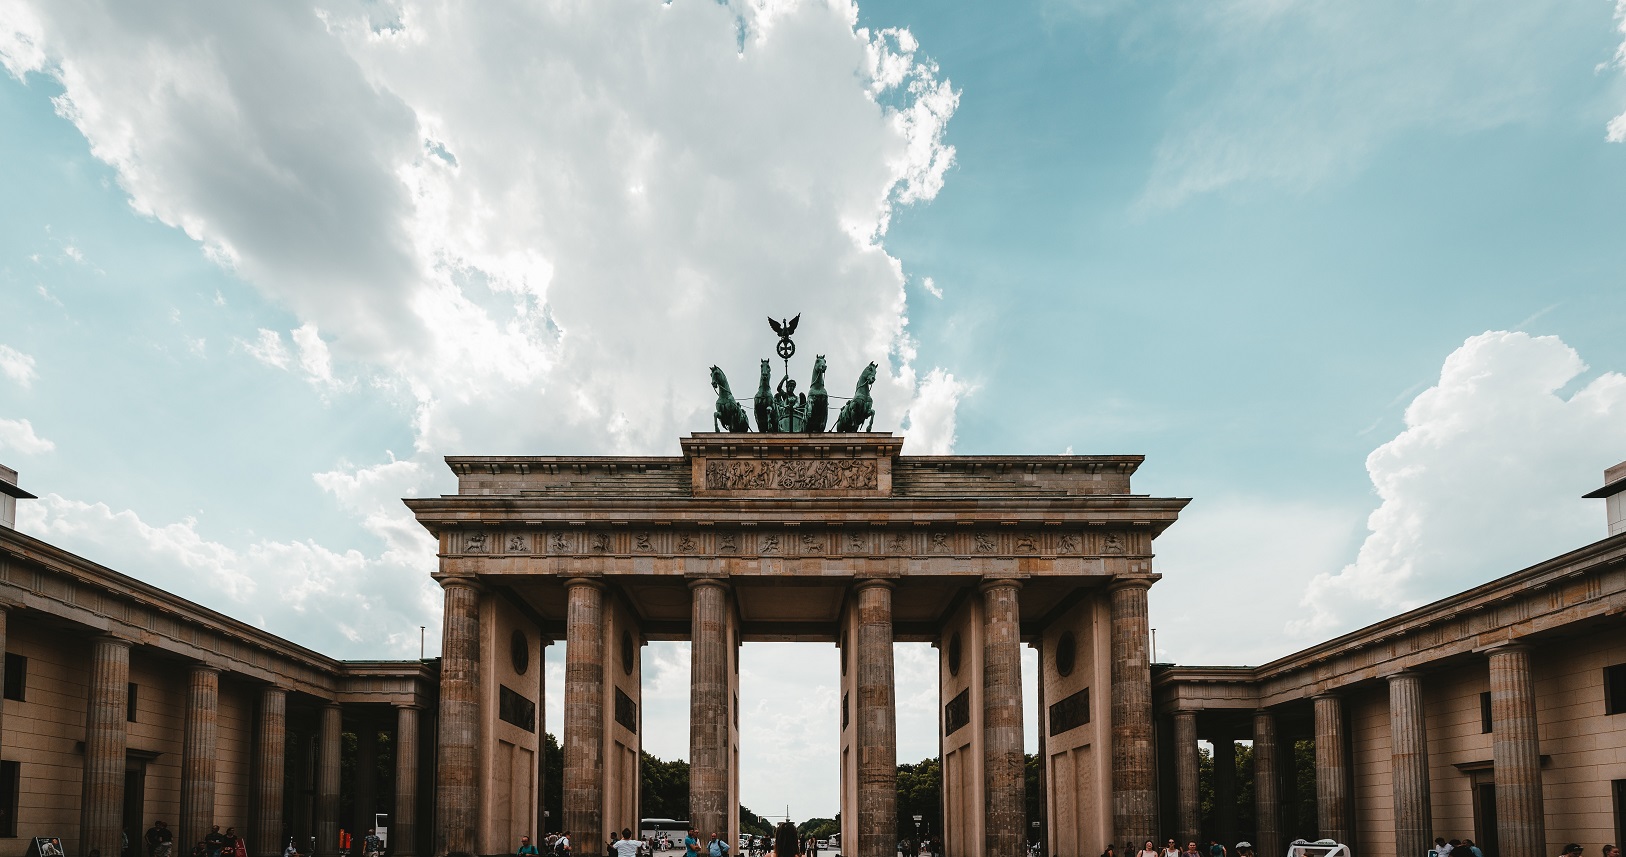 Welcome to Berlin – Festival for Newbies